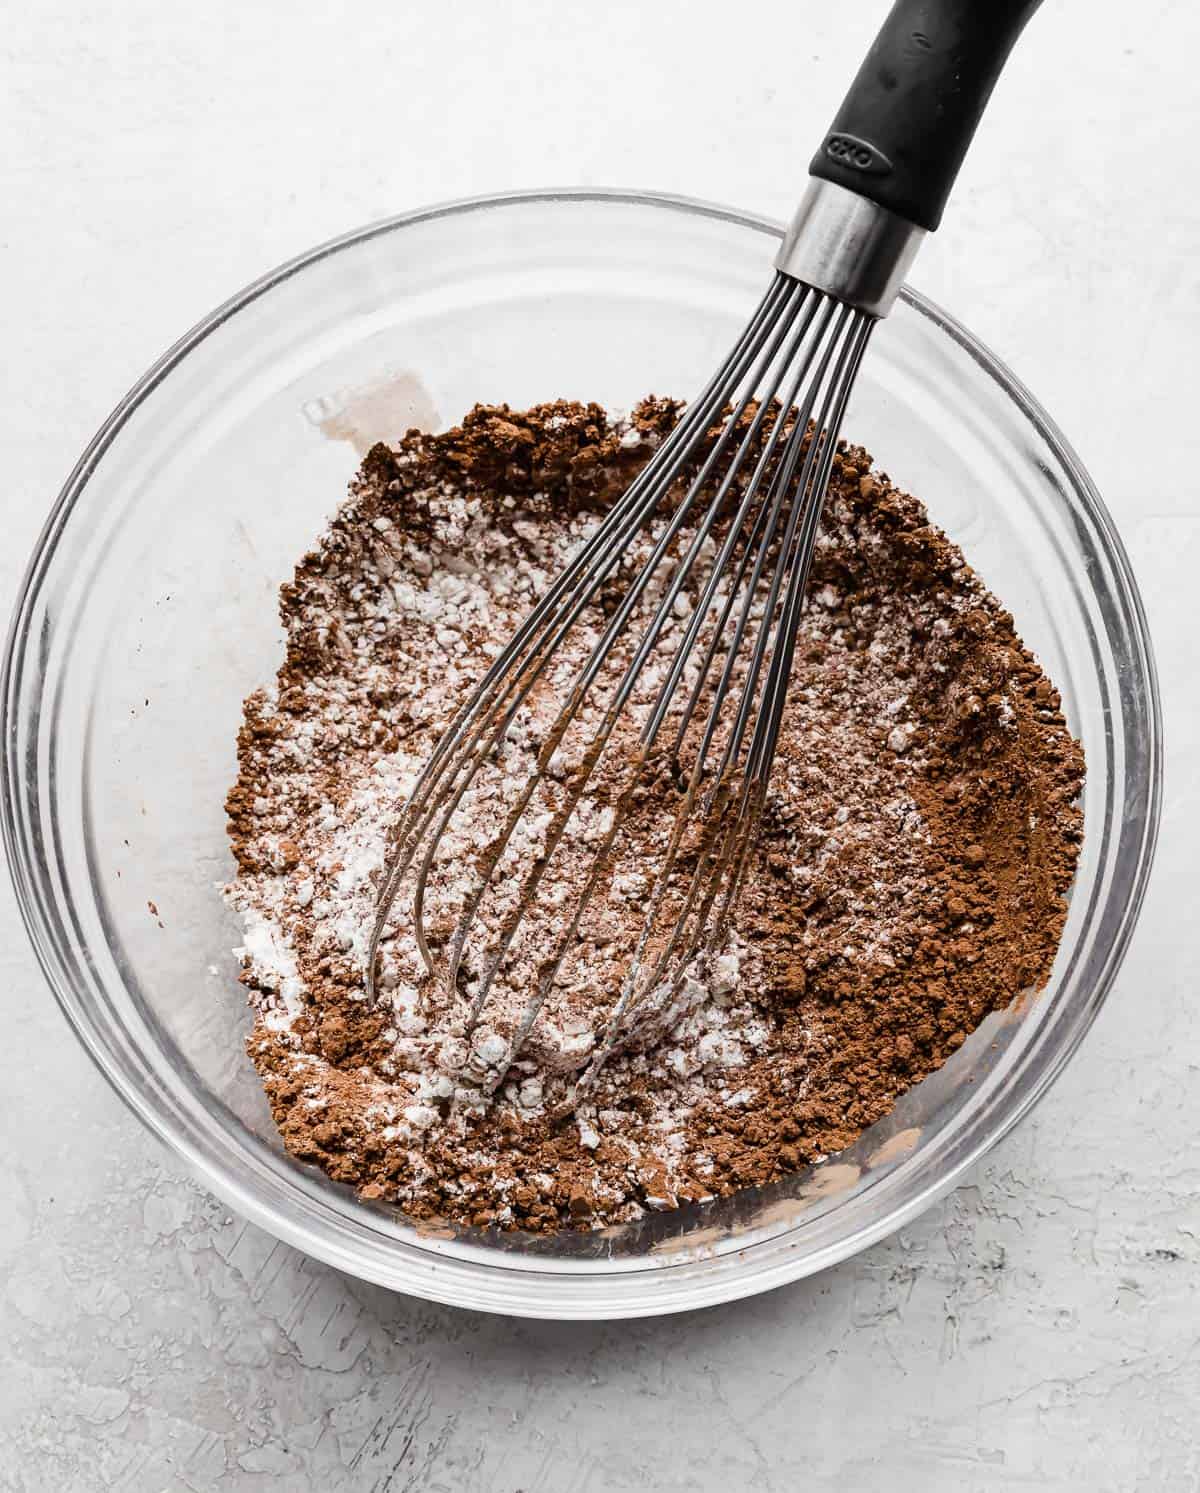 A whisk mixing a flour and cocoa powder for making chocolate orange cupcakes.